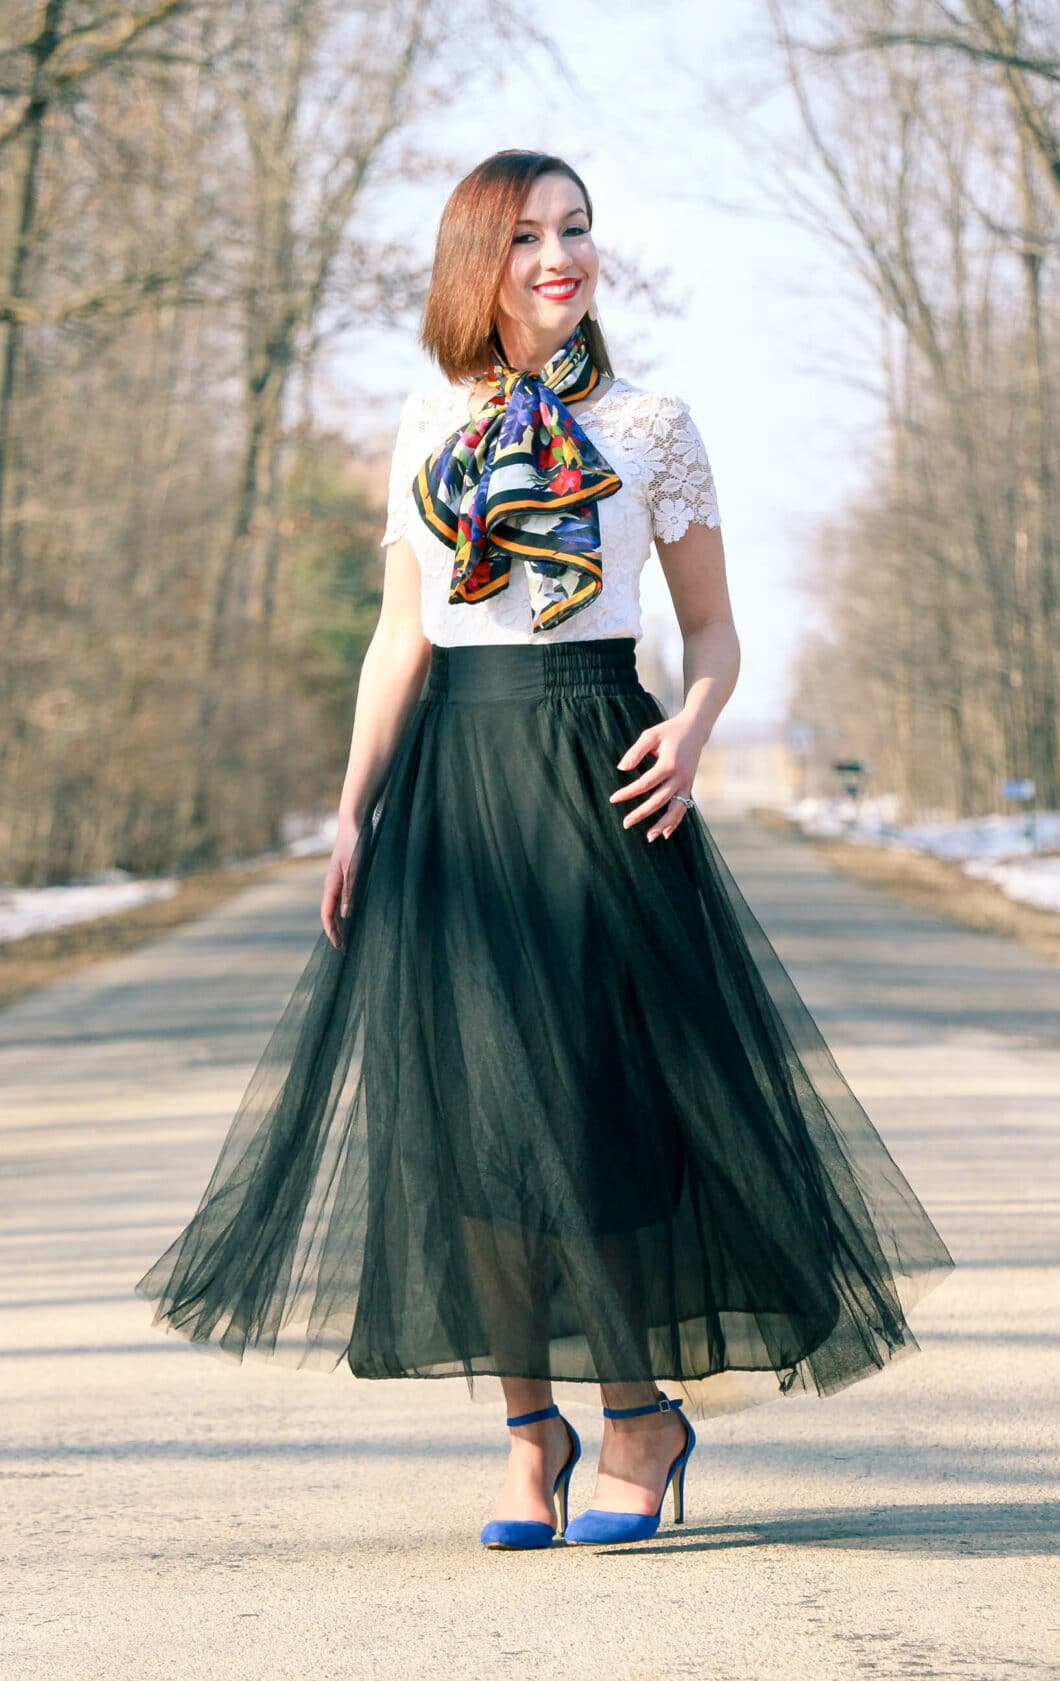 More Maxi Skirts, Please